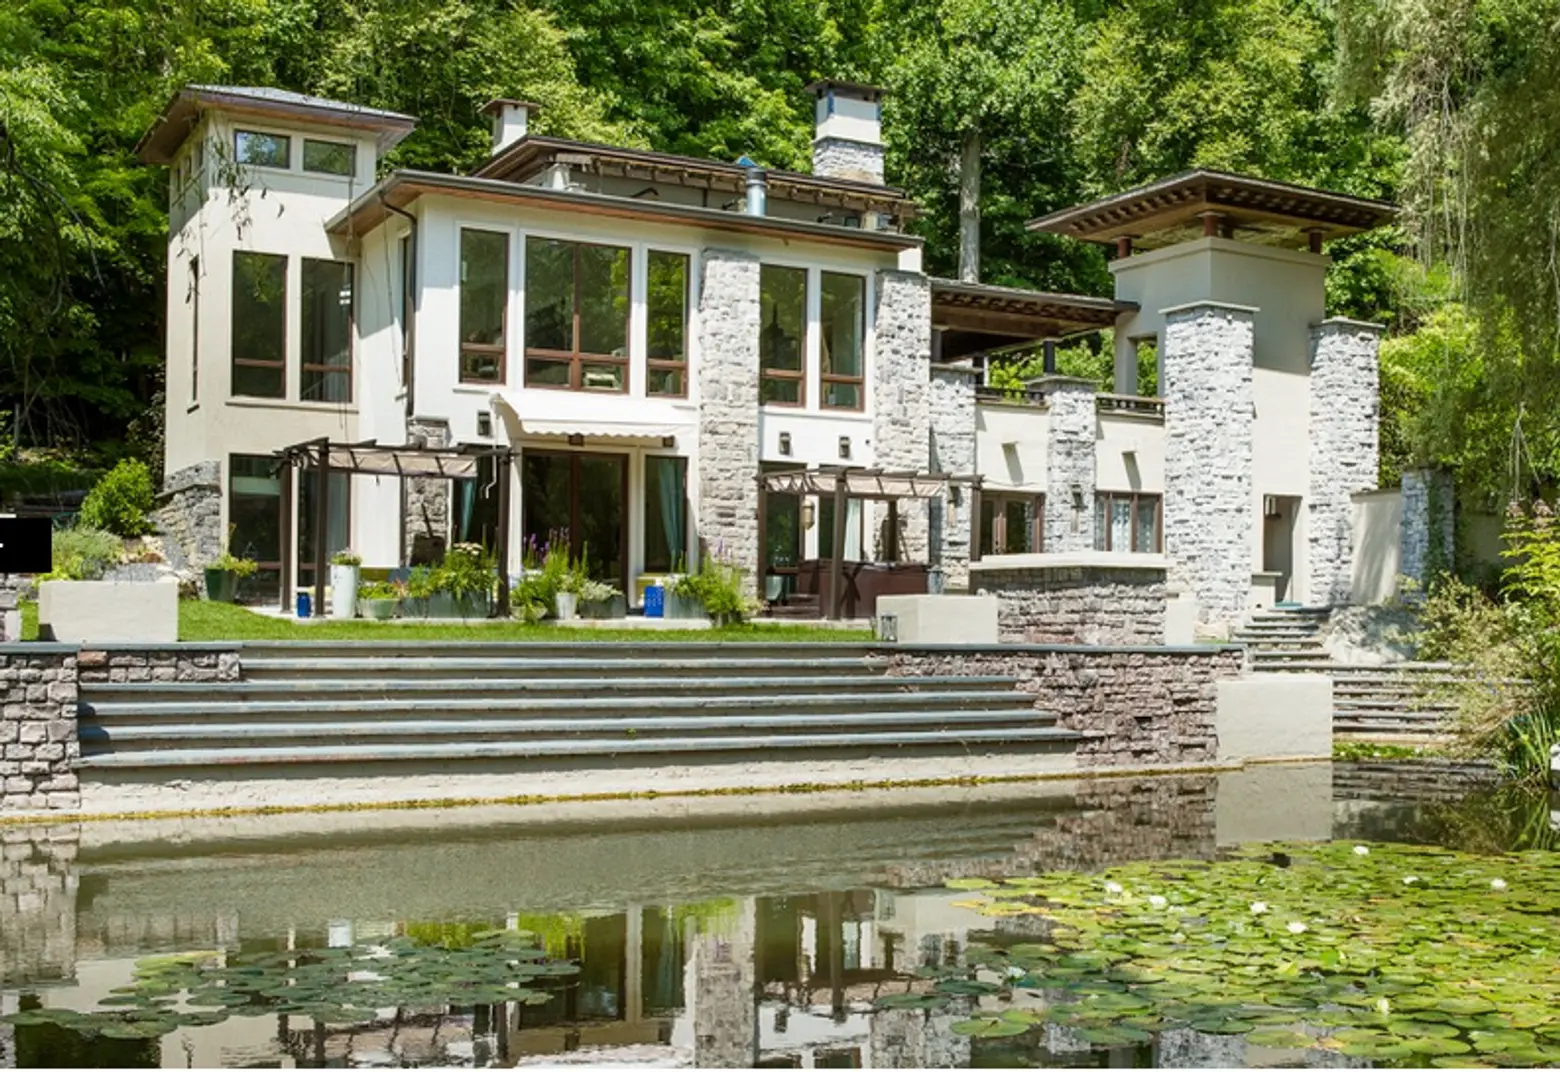 A Gorgeous Upstate Getaway Dubbed the Mission House Is Asking $1.4 Million